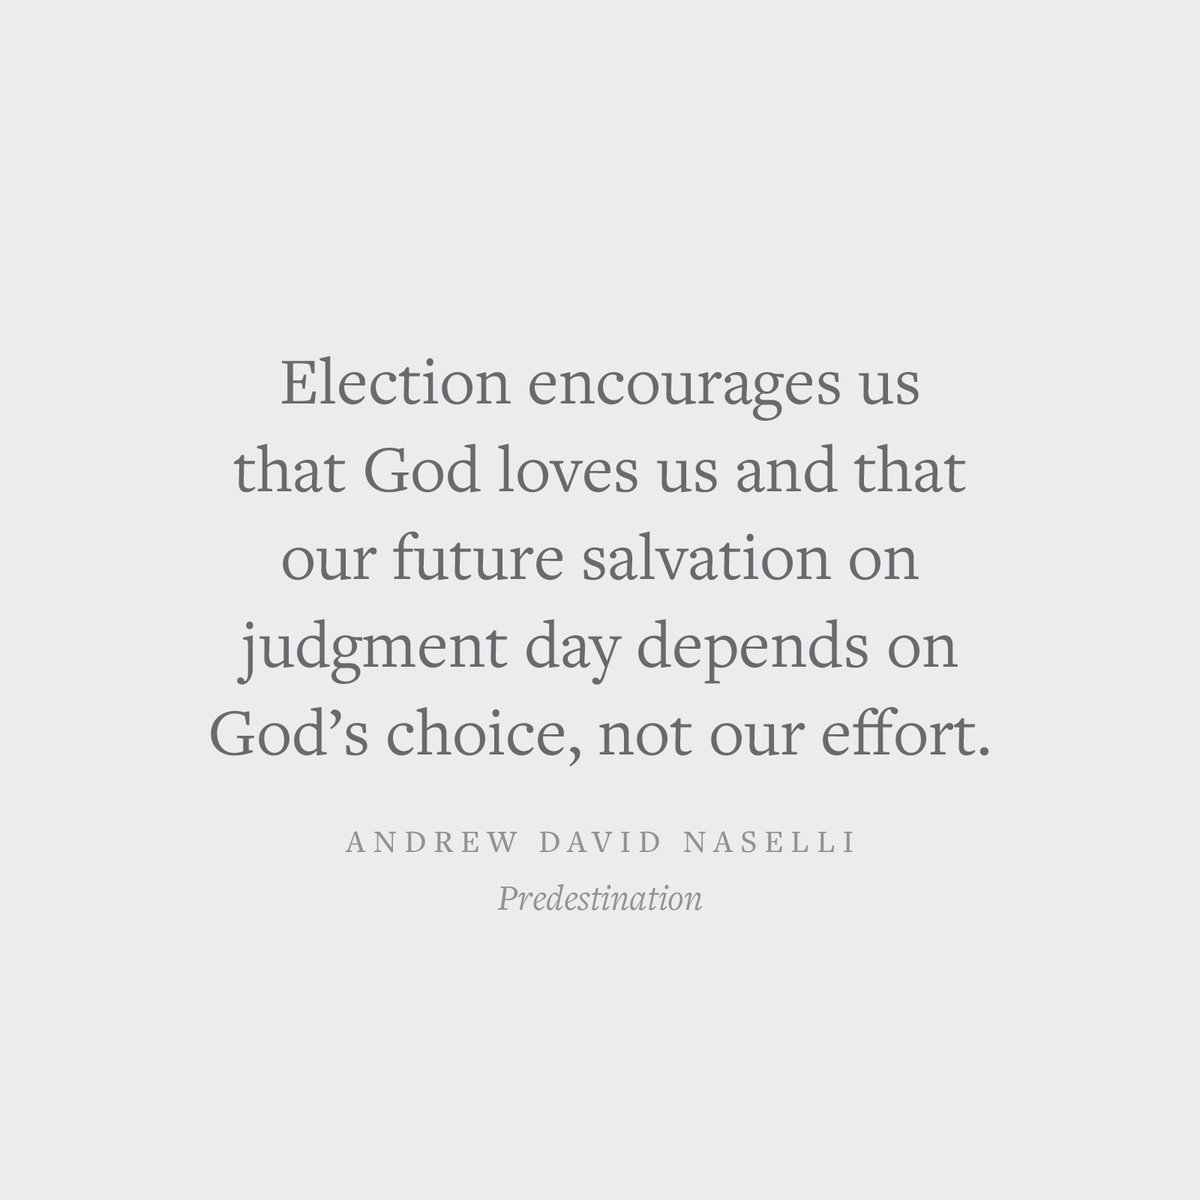 'Election encourages us that God loves us and that our future salvation on judgement day depends on God's choice, not our effort.' —Andrew David Naselli Crossway.org/predestination/